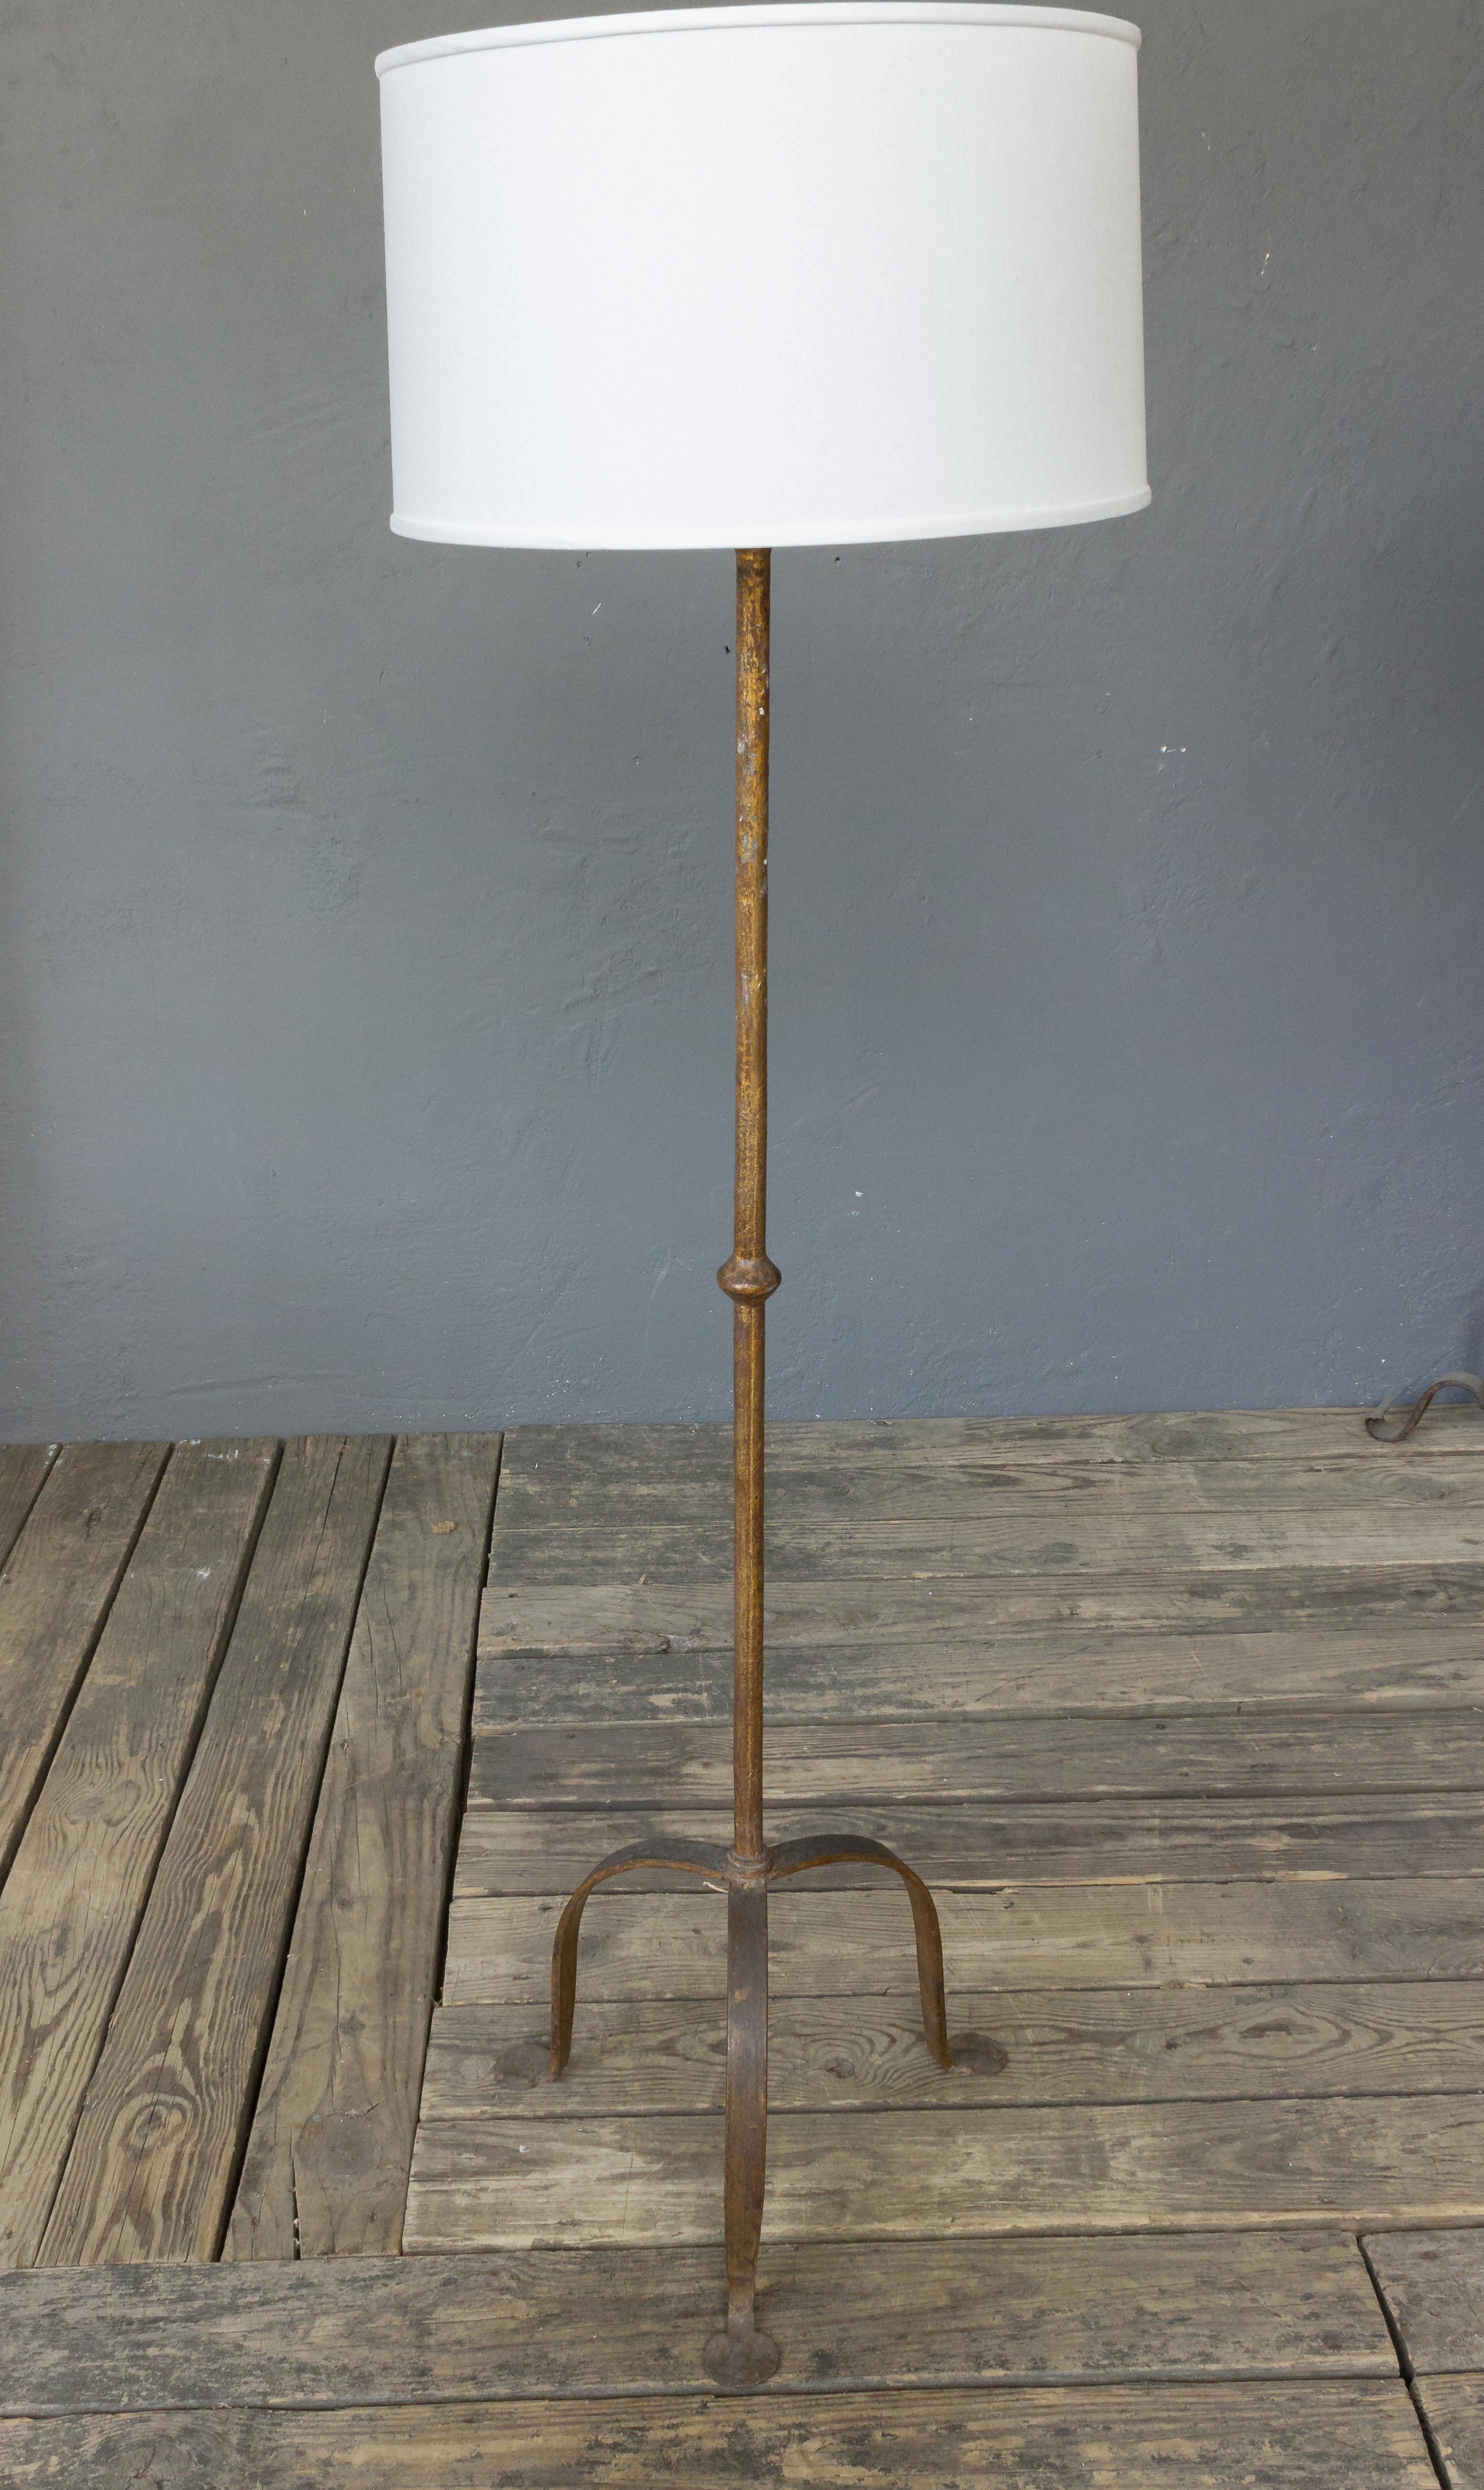 Spanish gilt iron floor lamp with tripod base, circa 1950s.  Recently rewired, sold in good vintage condition. The lamp has a rich dark gold patina. 

Not sold with shade.